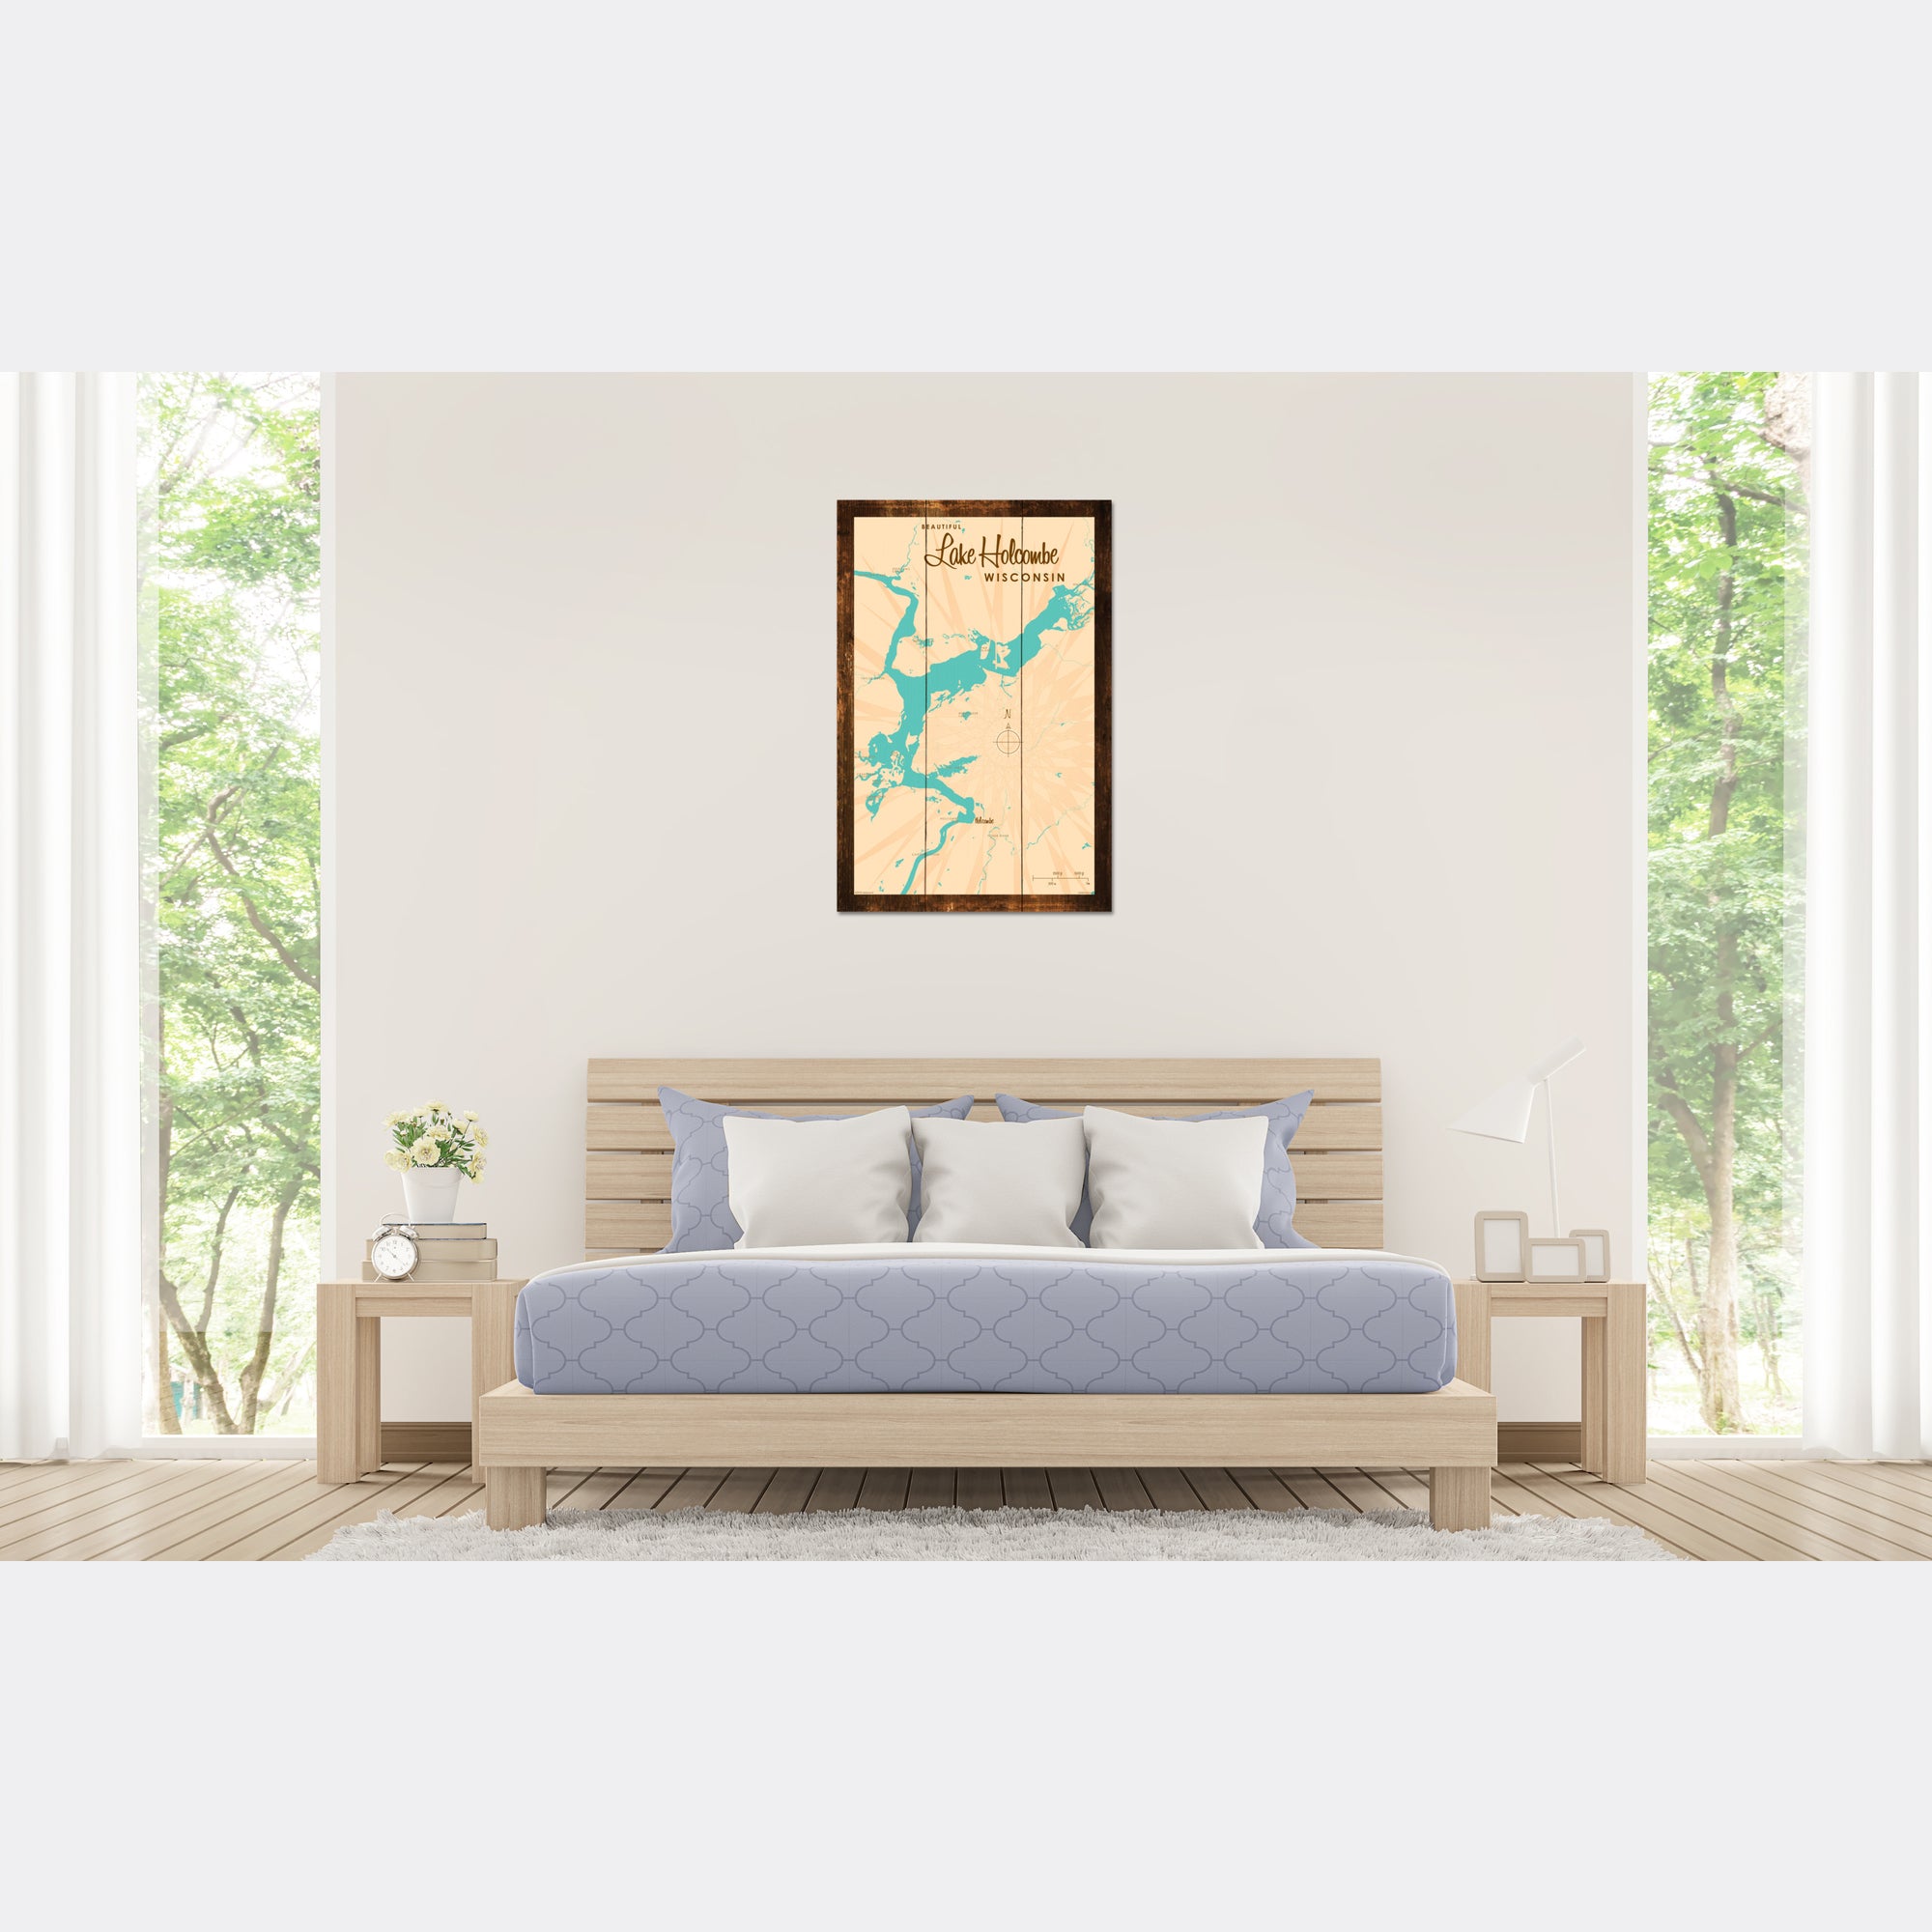 Lake Holcombe Wisconsin, Rustic Wood Sign Map Art